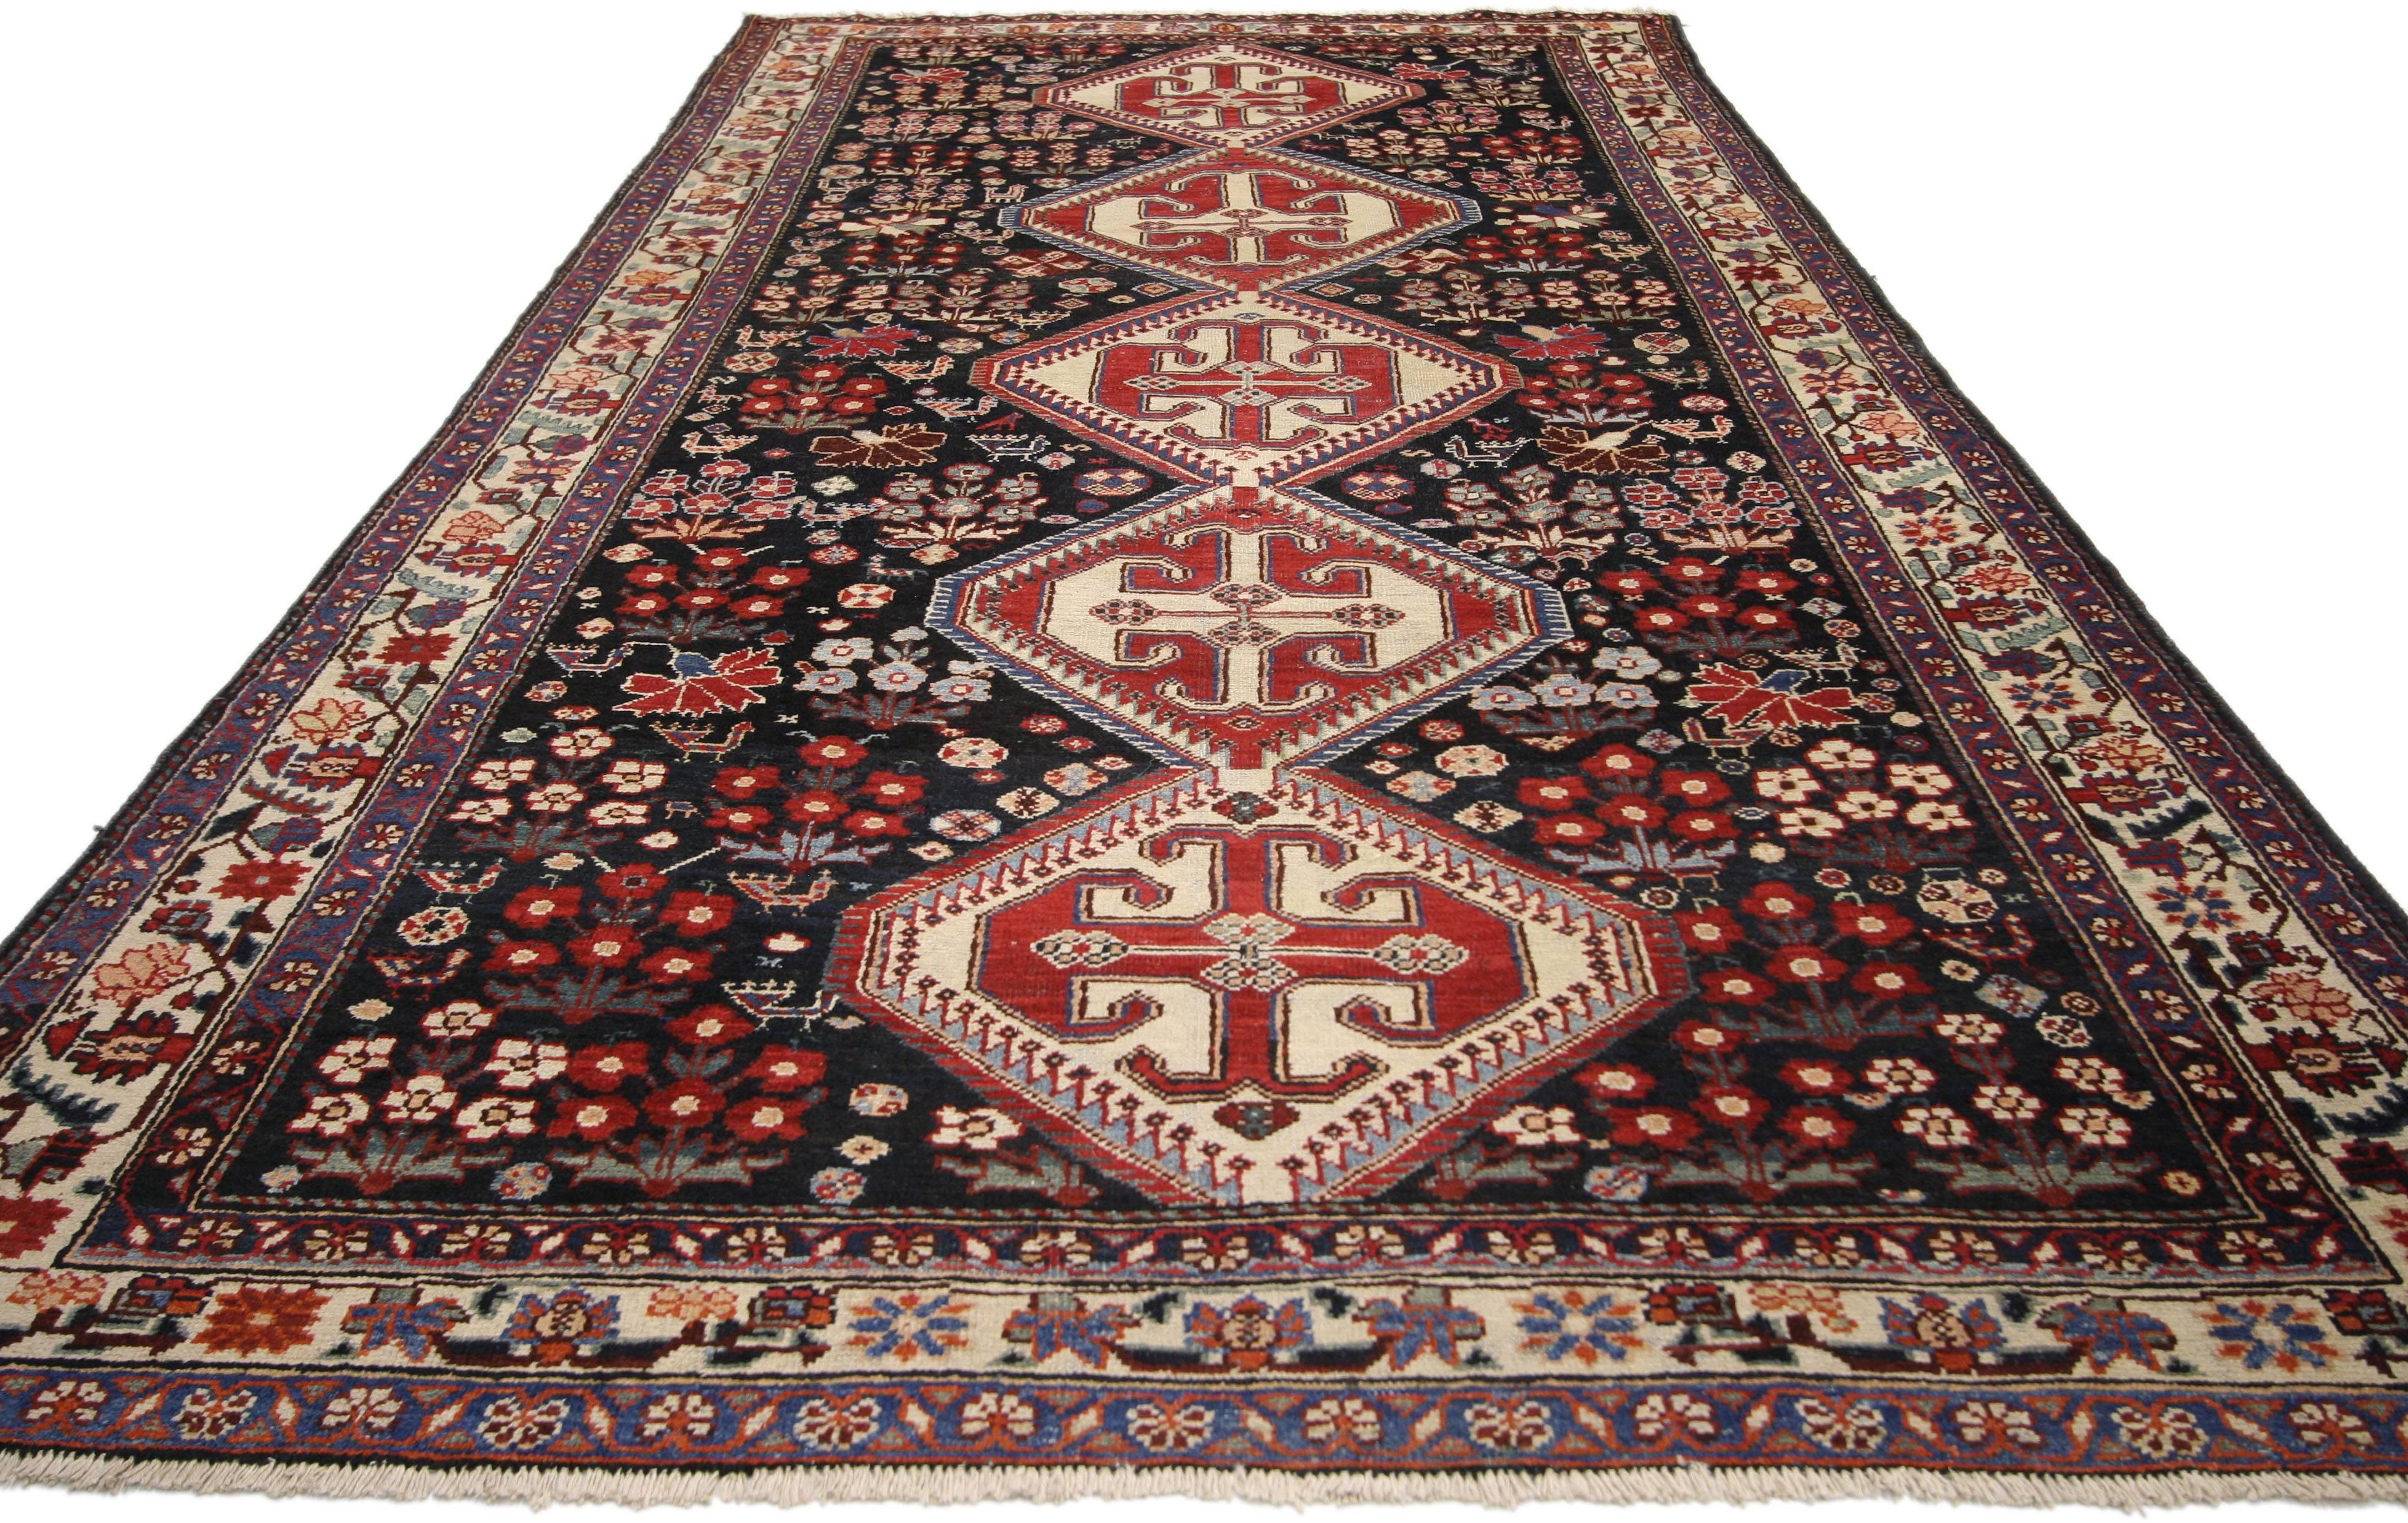 75266, antique Persian Mahal Amulet patterned rug with traditional style. This exquisite Persian Mahal rug with traditional style features a row of five amulets in alternating shades of deep persimmon and cream. The amulets rest on a field of onyx